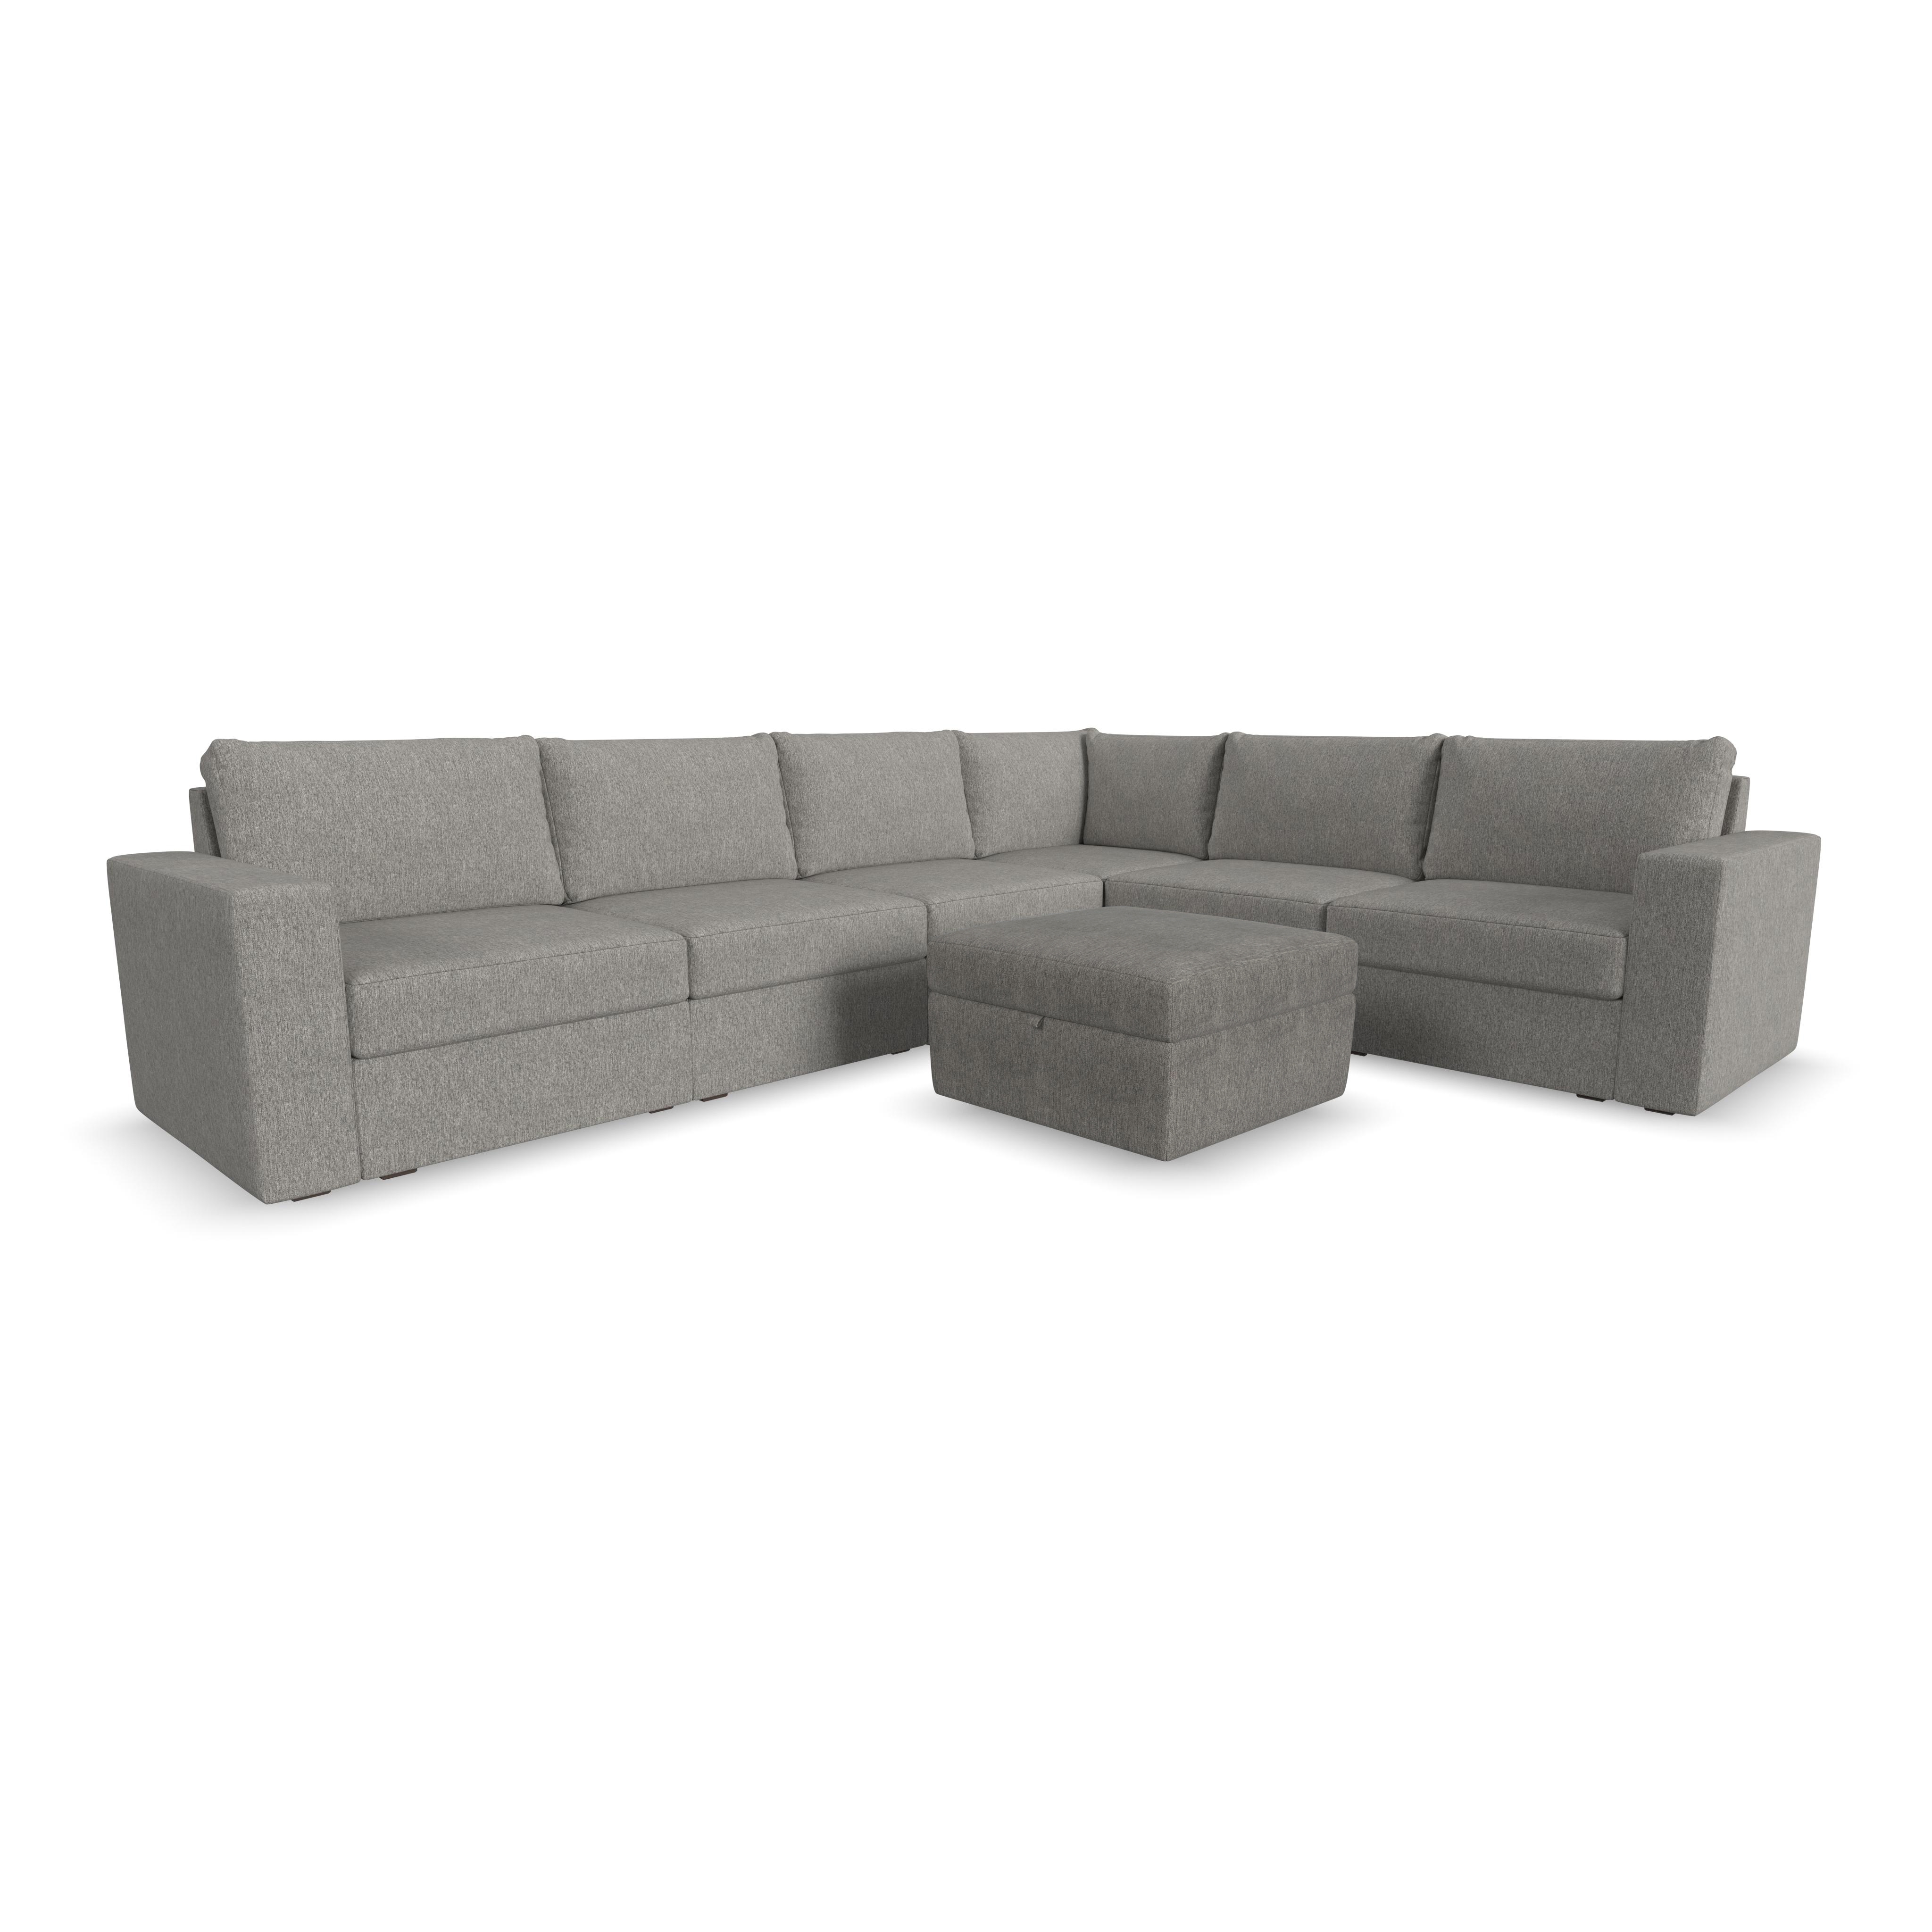 Flexsteel Flex 6-Seat Sectional with Wide Arm and Storage Ottoman